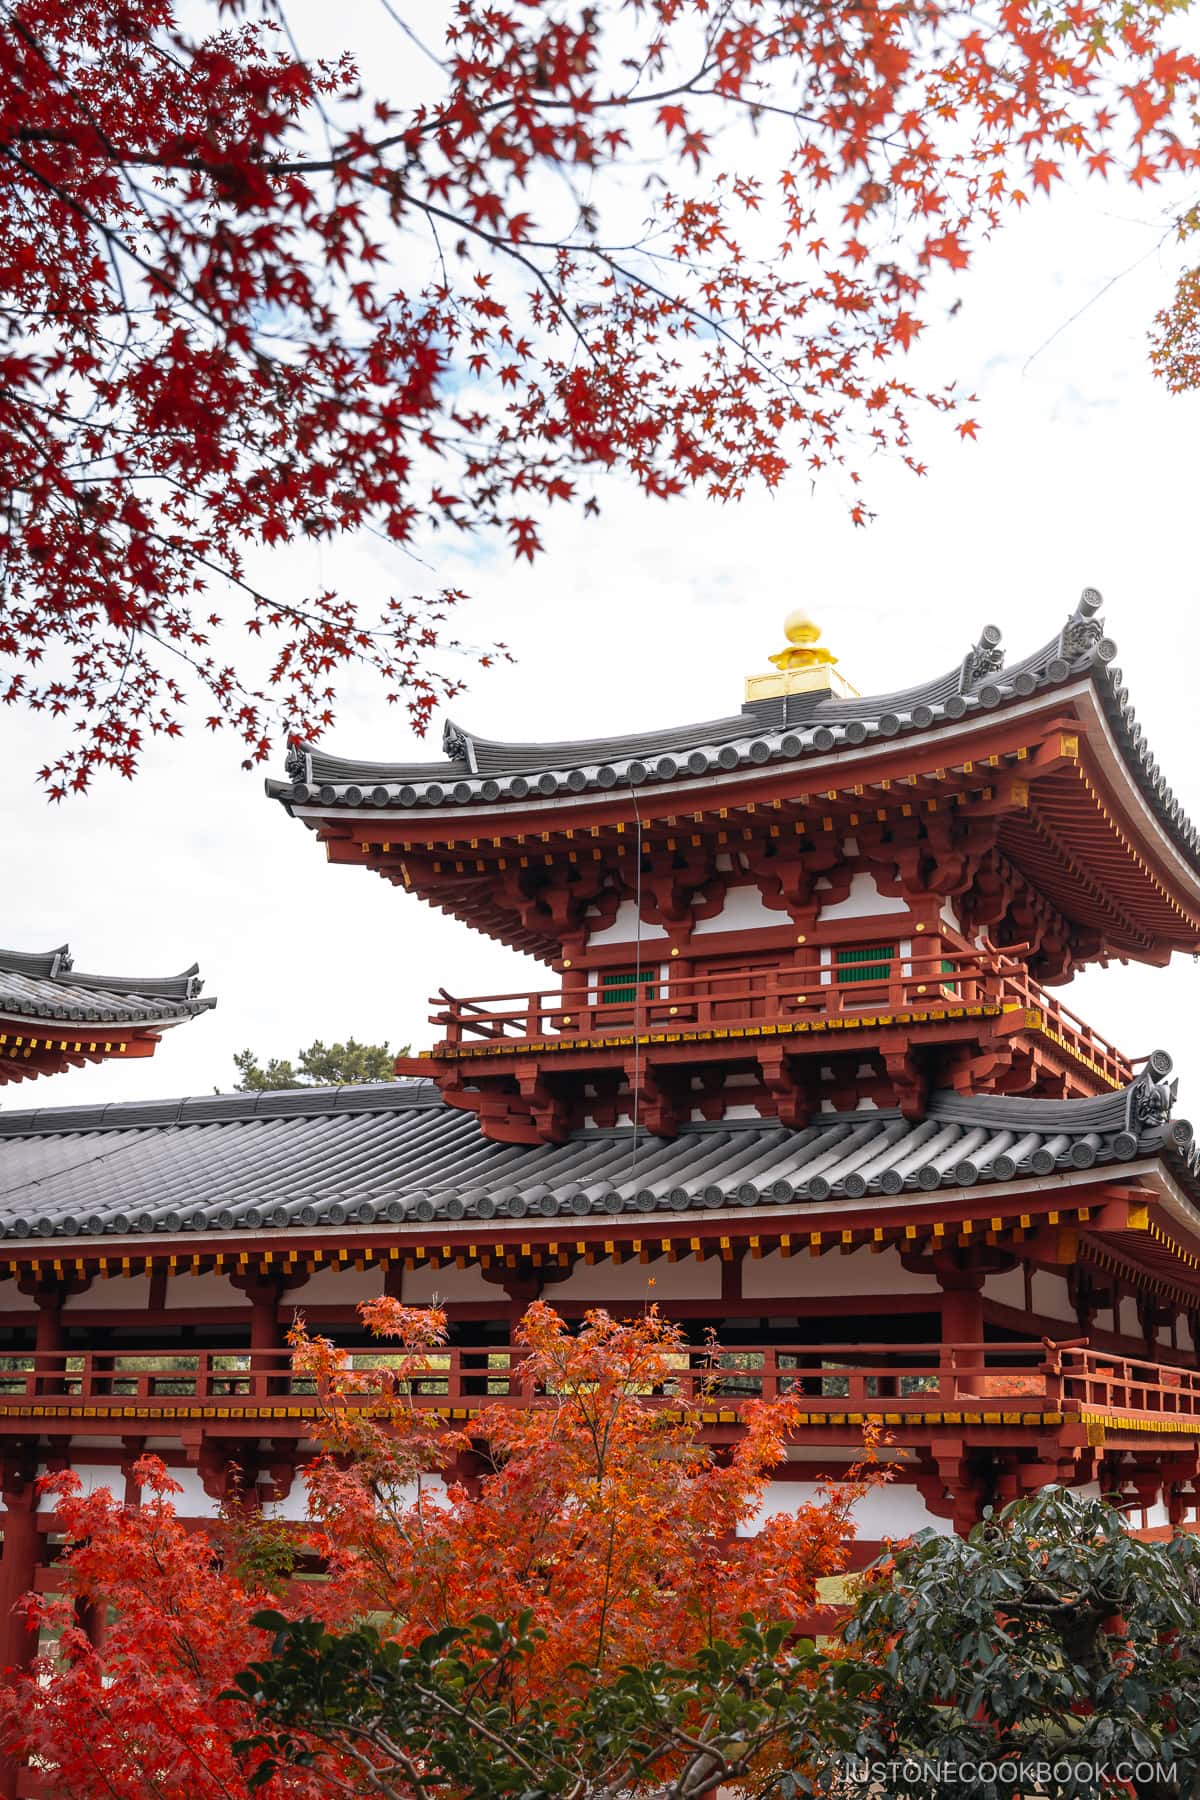 Temple detail surrounded by autumn leaves